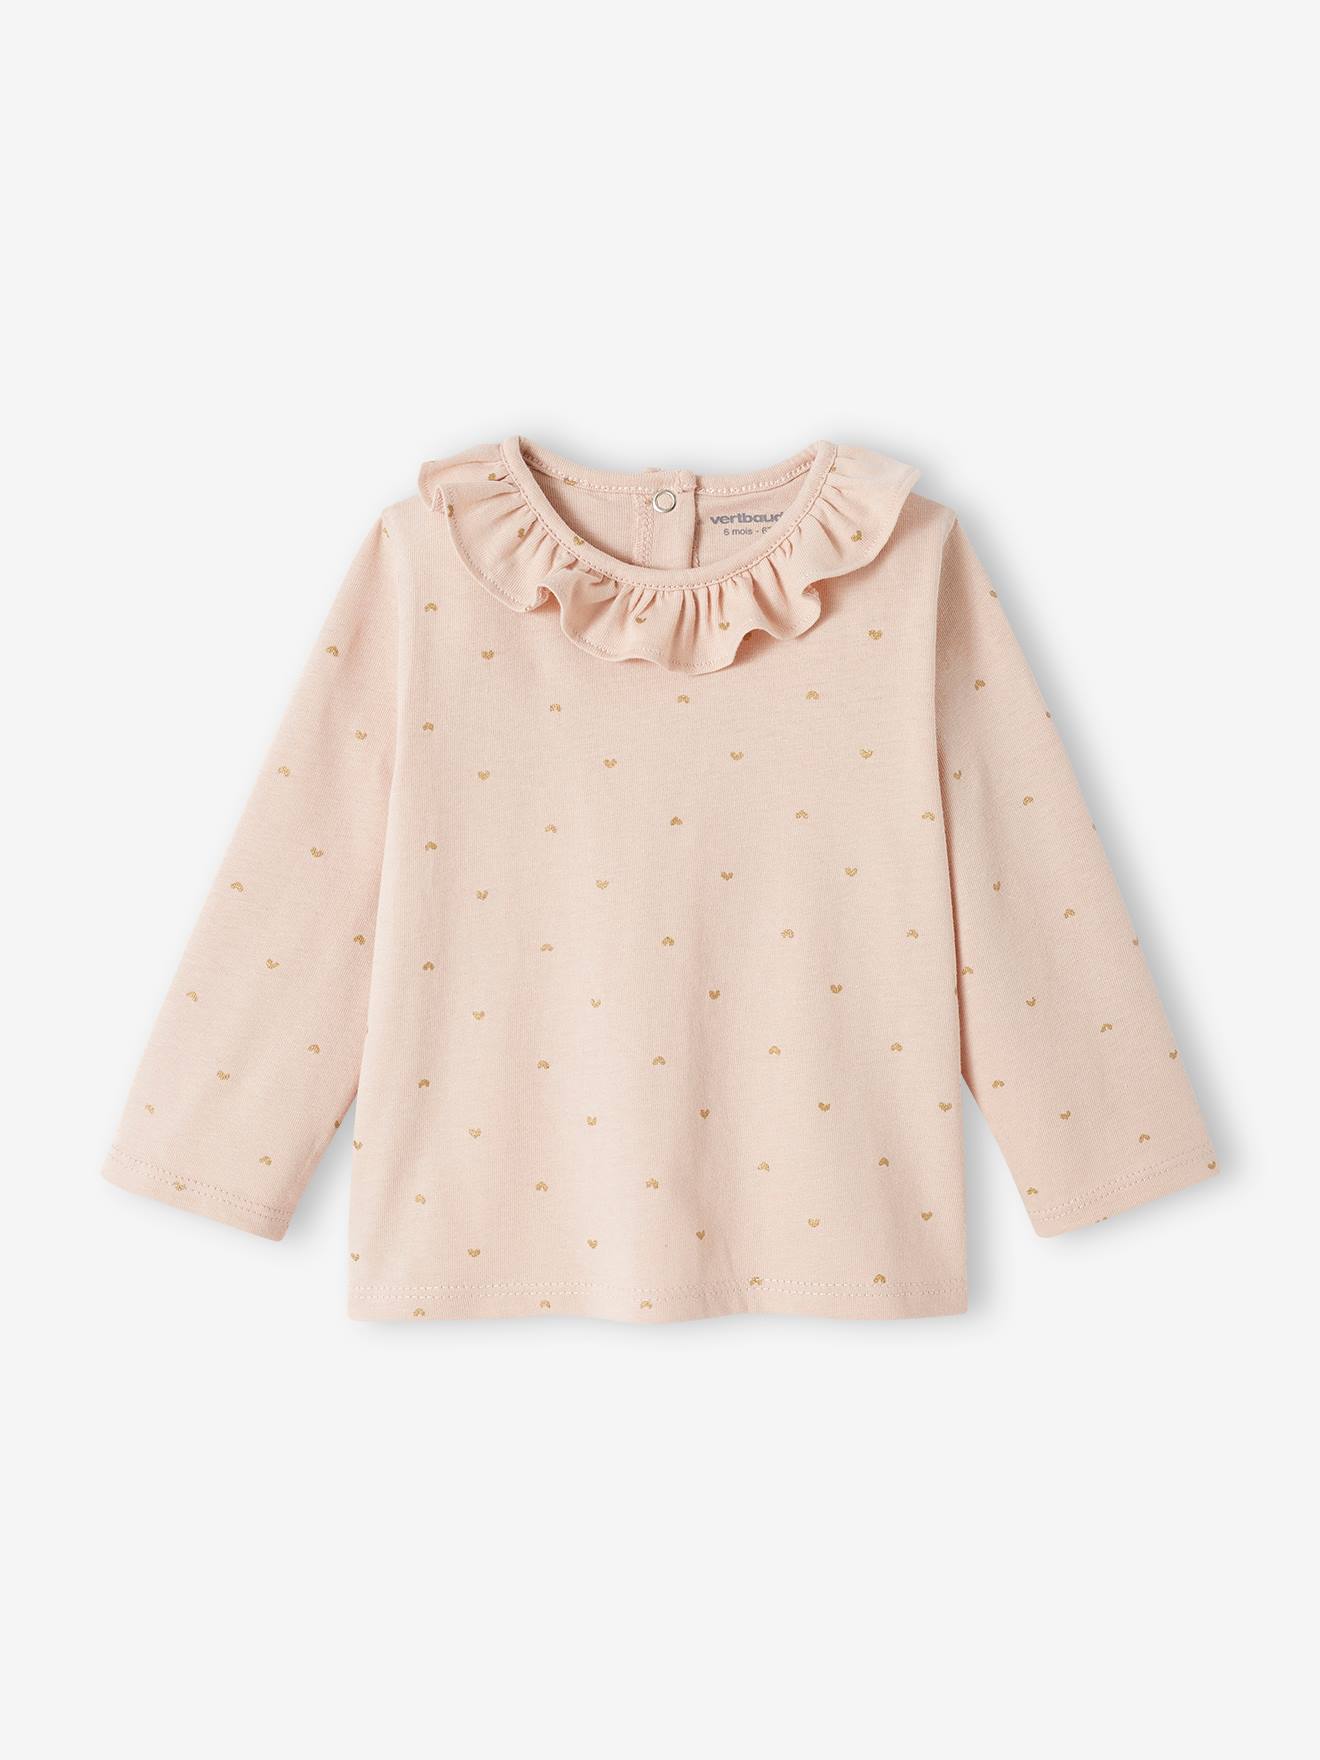 Top with Frill on the Neckline, for Baby Girls rosy